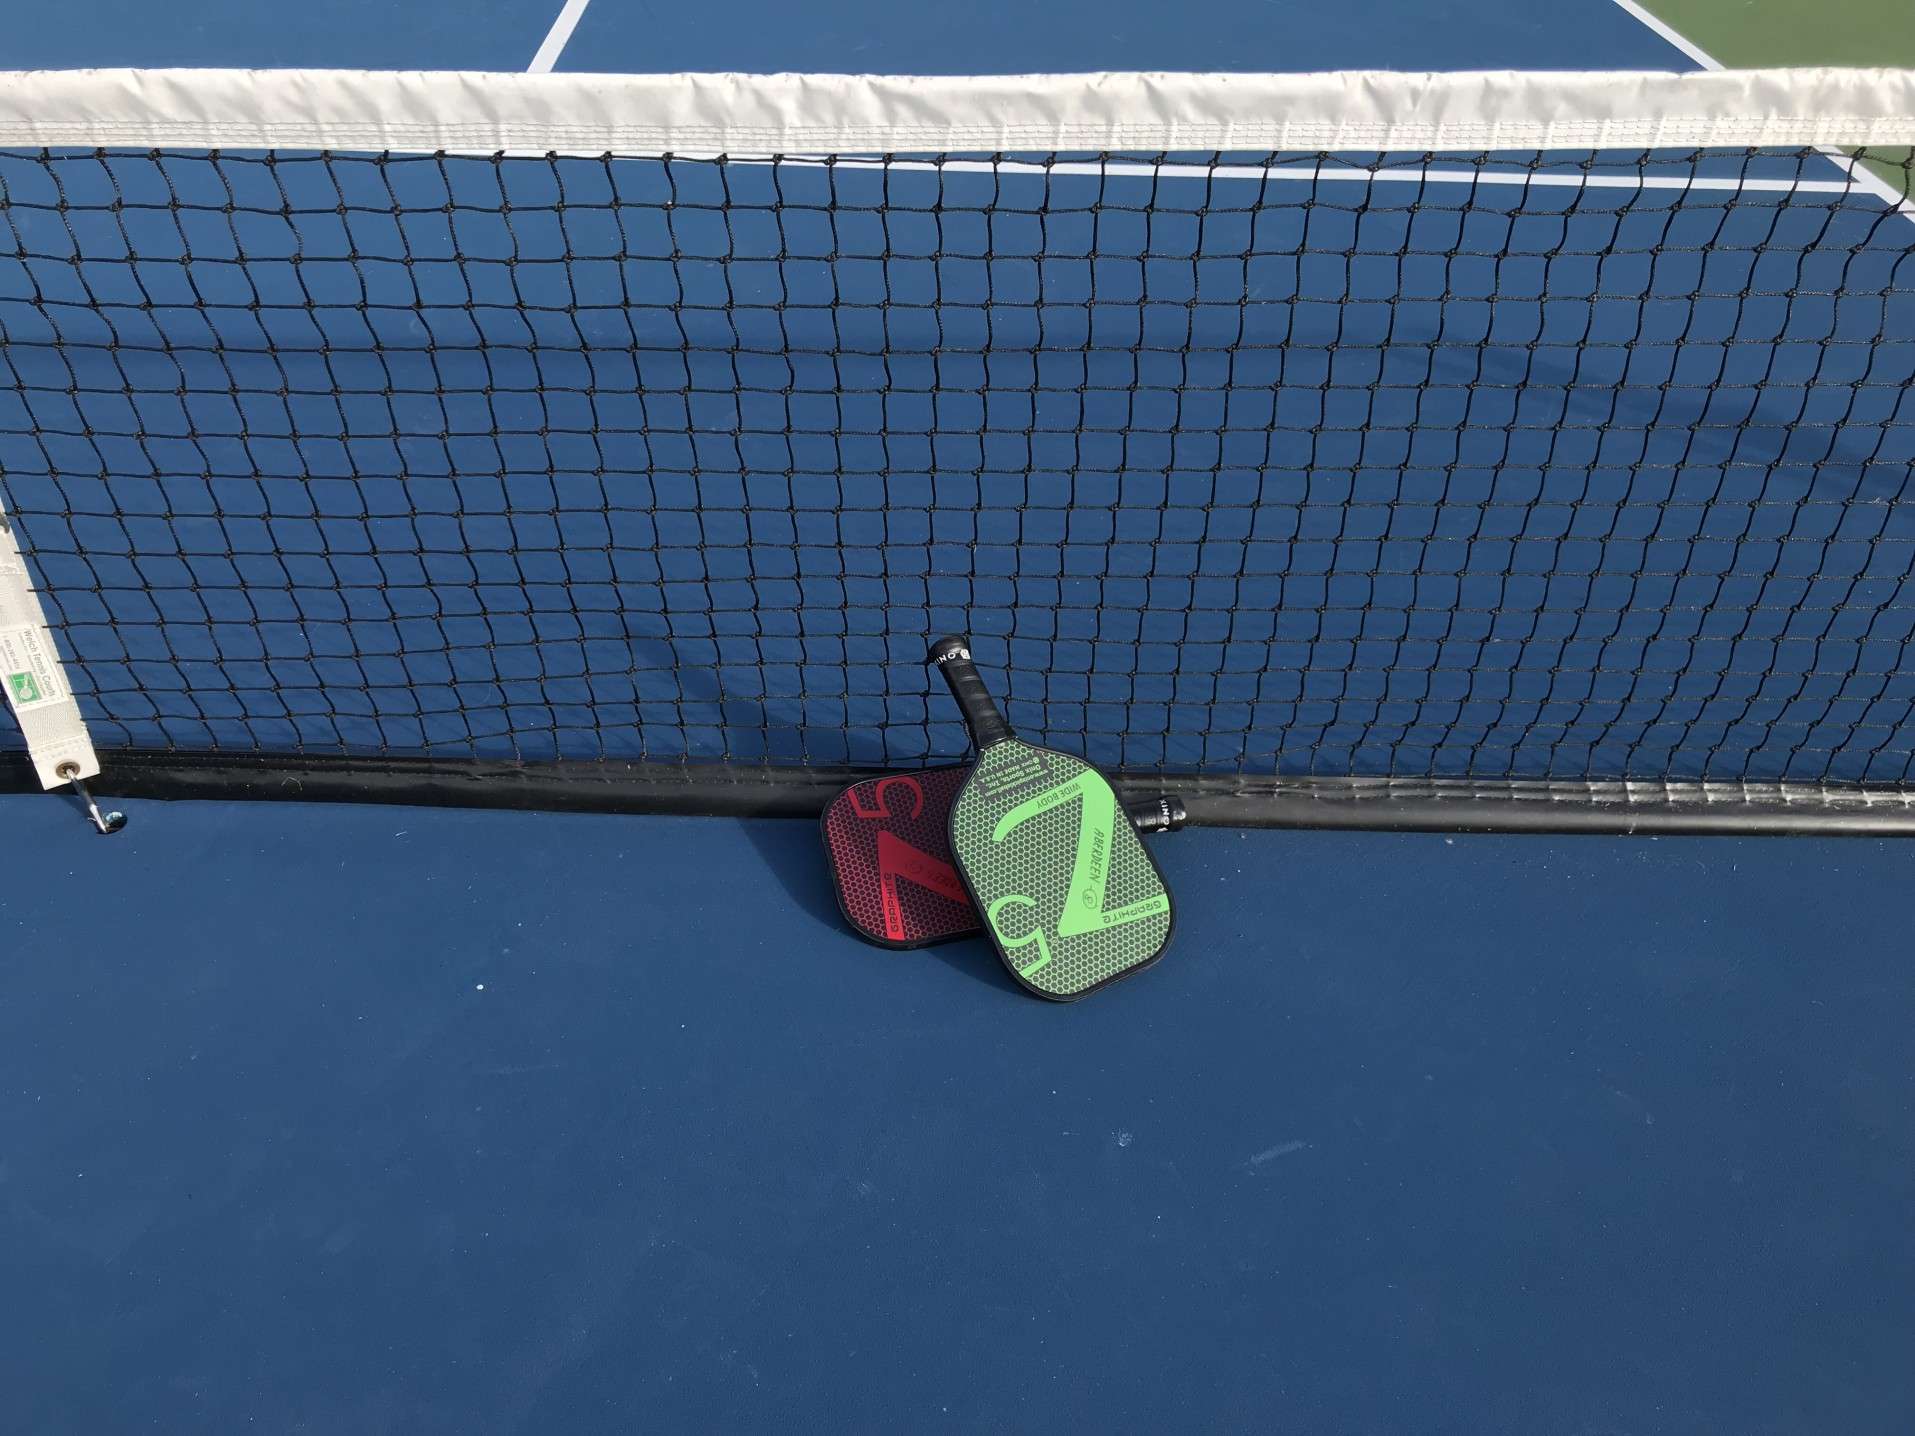 Two pickleball paddles sitting next to net